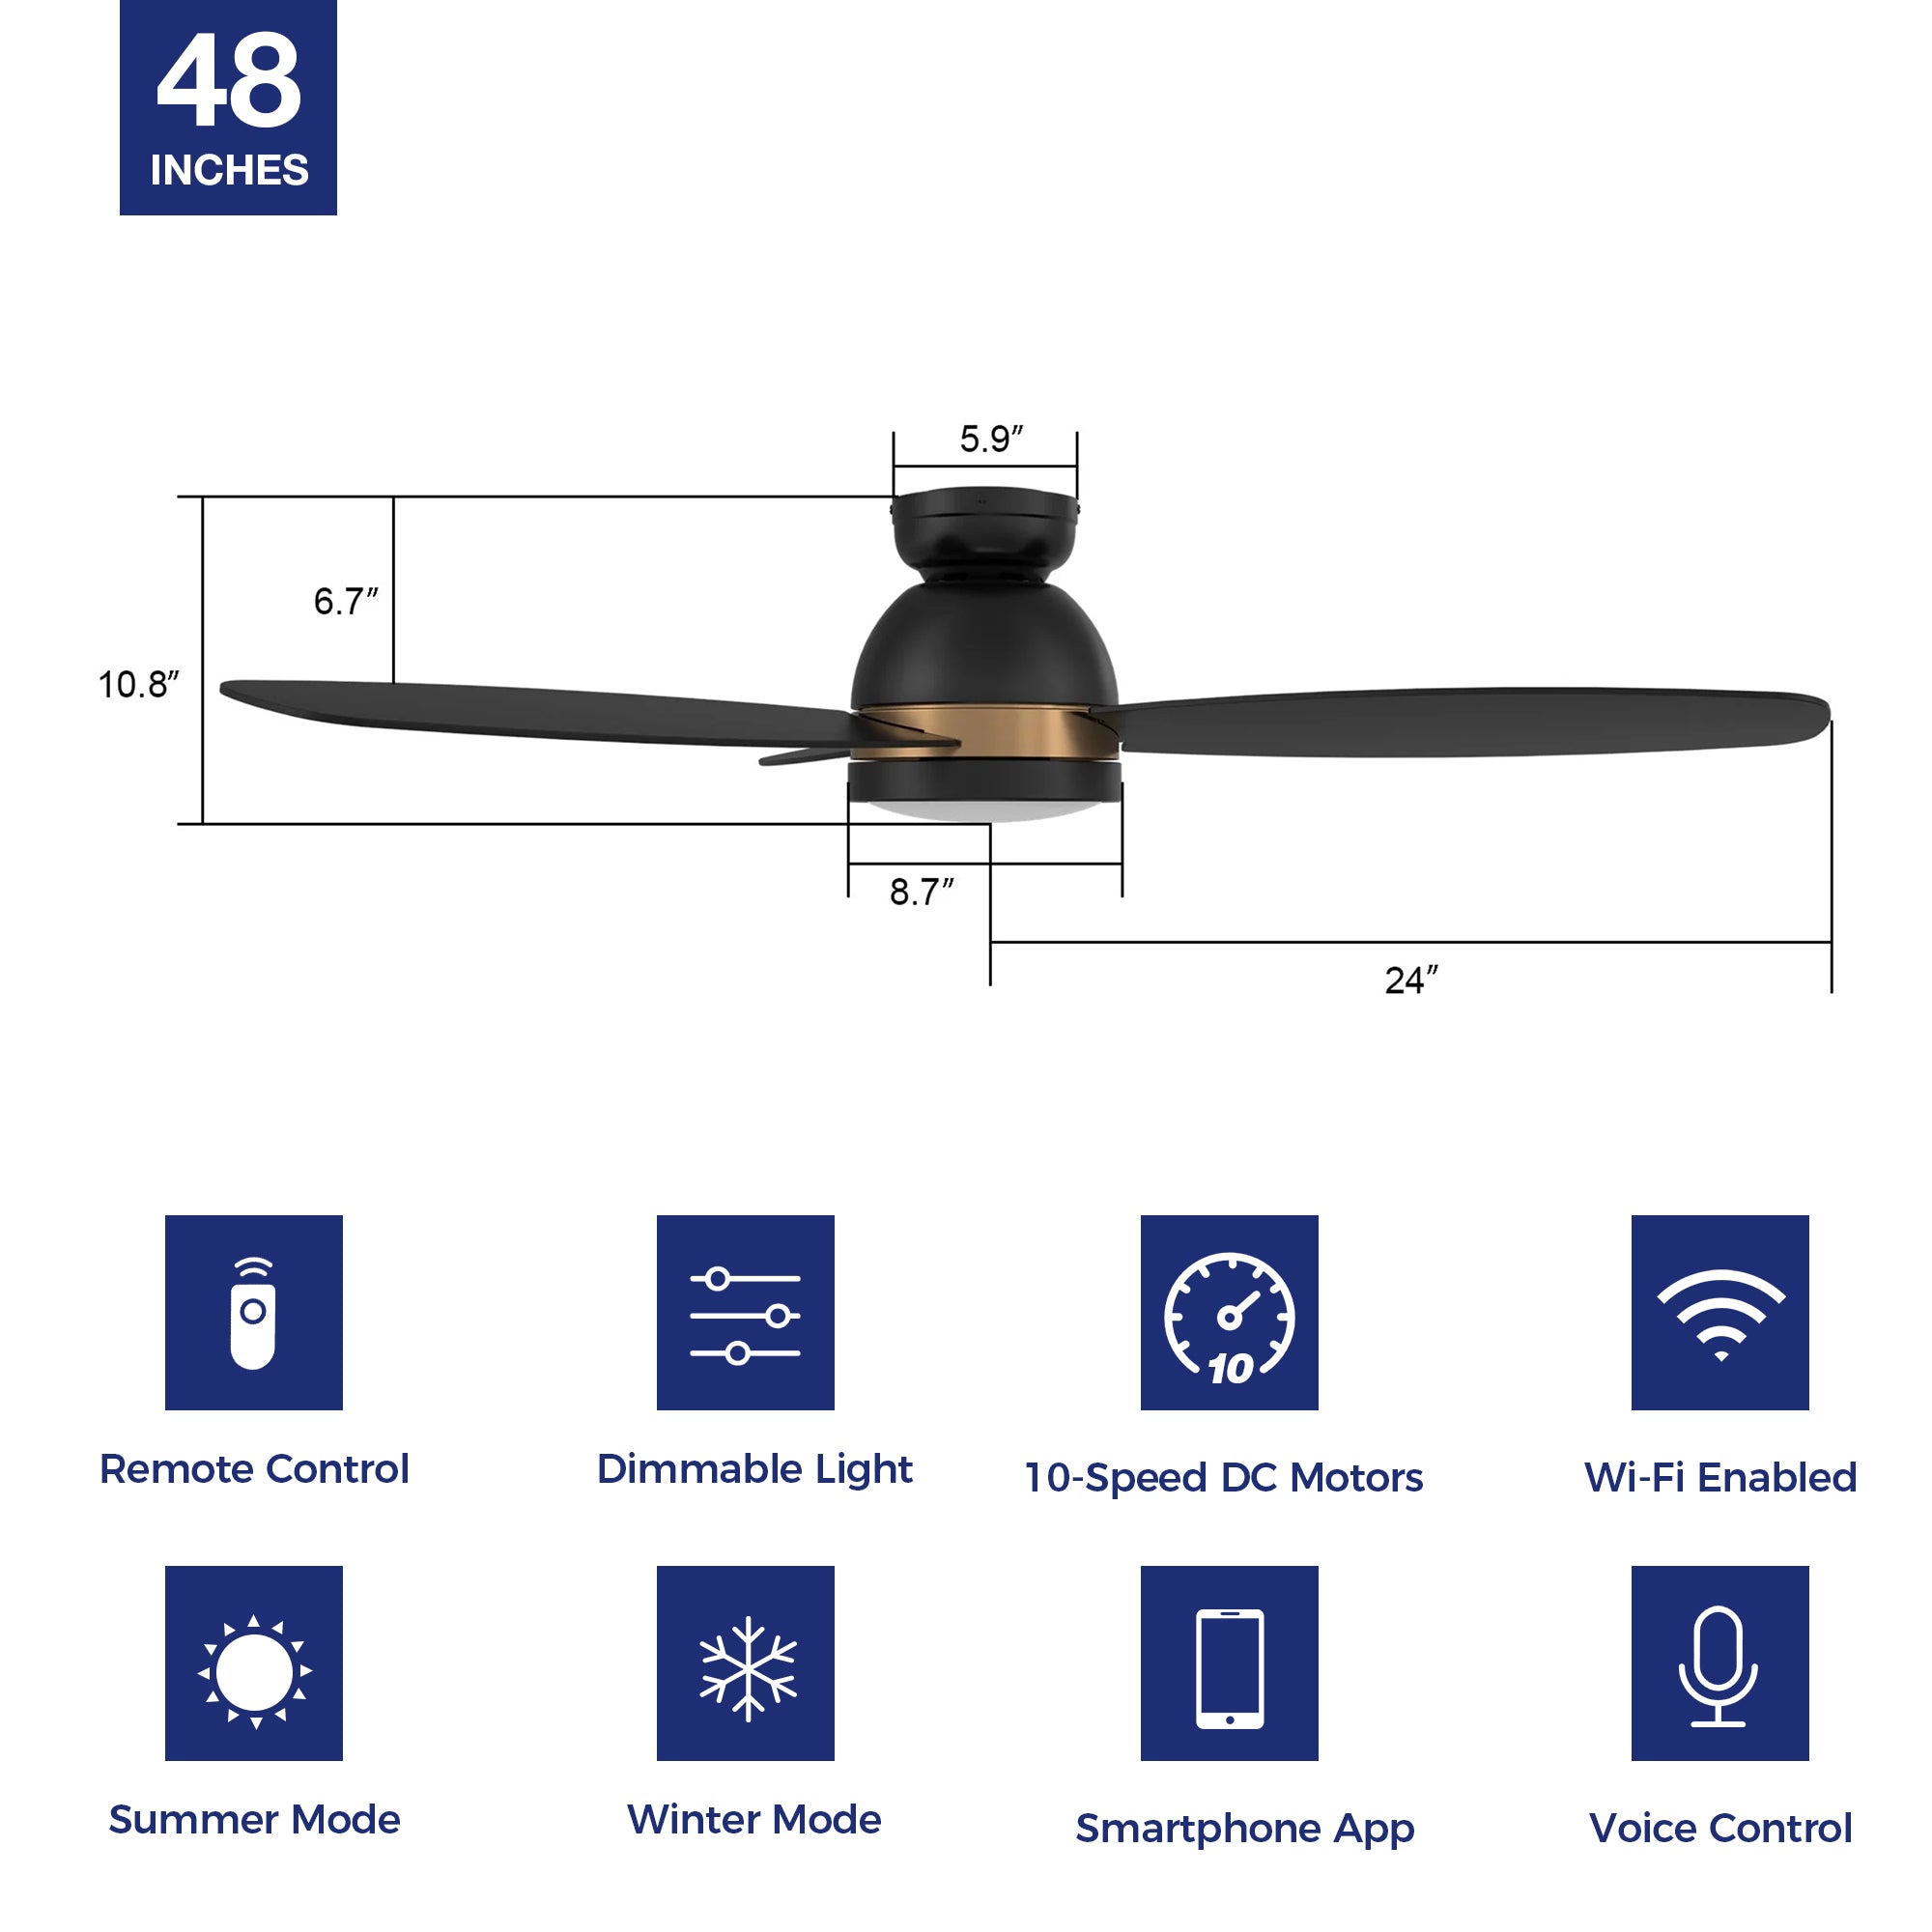 This Biscay 48'' smart ceiling fan keeps your space cool, bright, and stylish. It is a soft modern masterpiece perfect for your large indoor living spaces. This Wifi smart ceiling fan is a simplicity designing with Black finish, use elegant Plywood blades and has an integrated 4000K LED daylight. The fan features Remote control, Wi-Fi apps, Siri Shortcut and Voice control technology (compatible with Amazon Alexa and Google Home Assistant ) to set fan preferences. #color_black